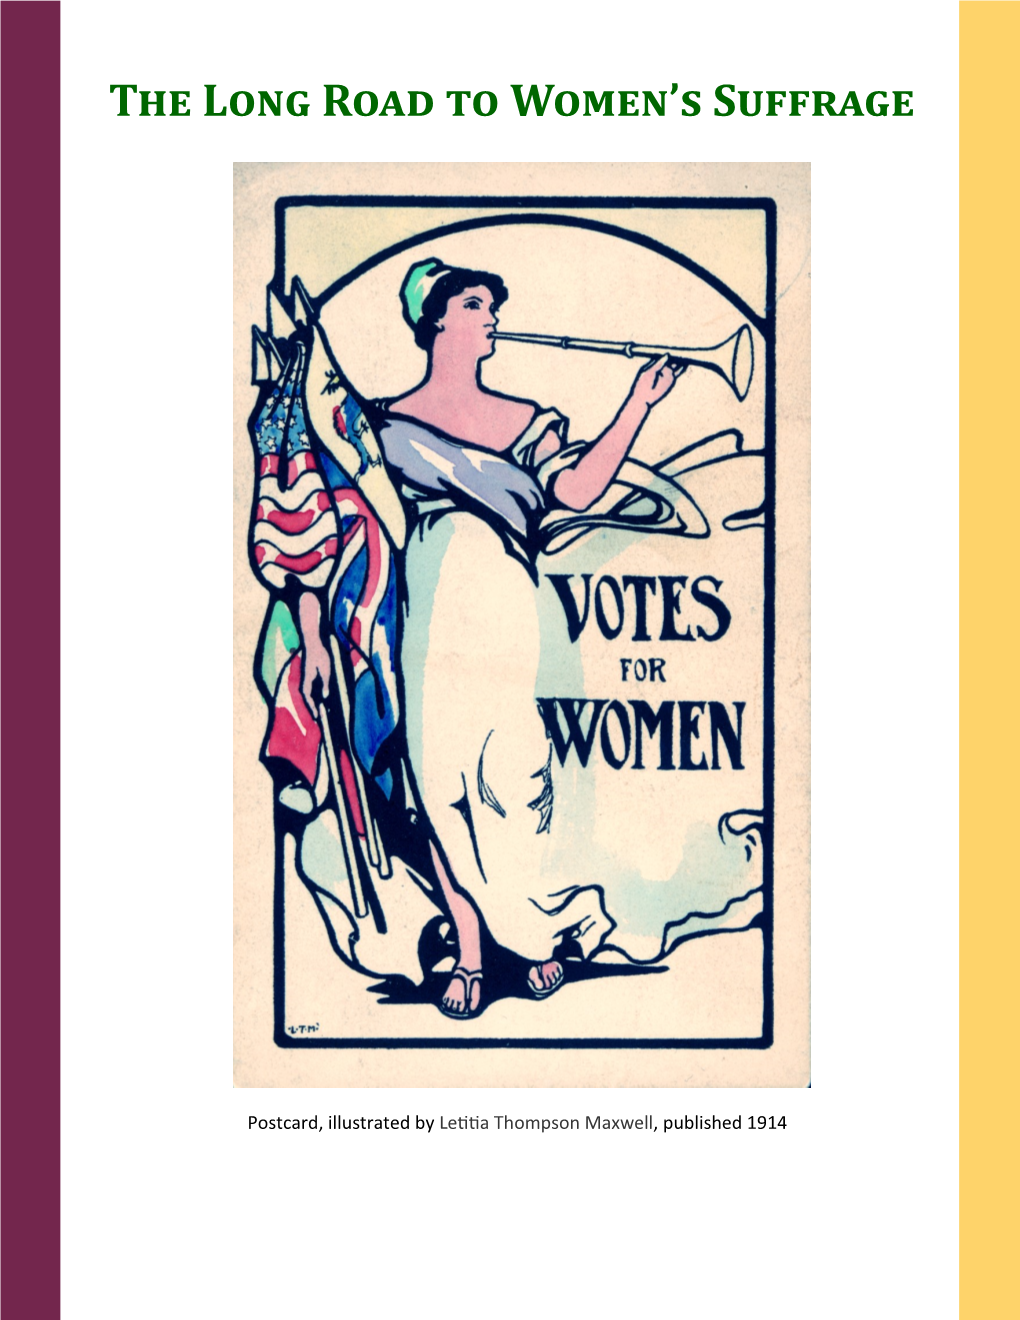 The Long Road to Women's Suffrage